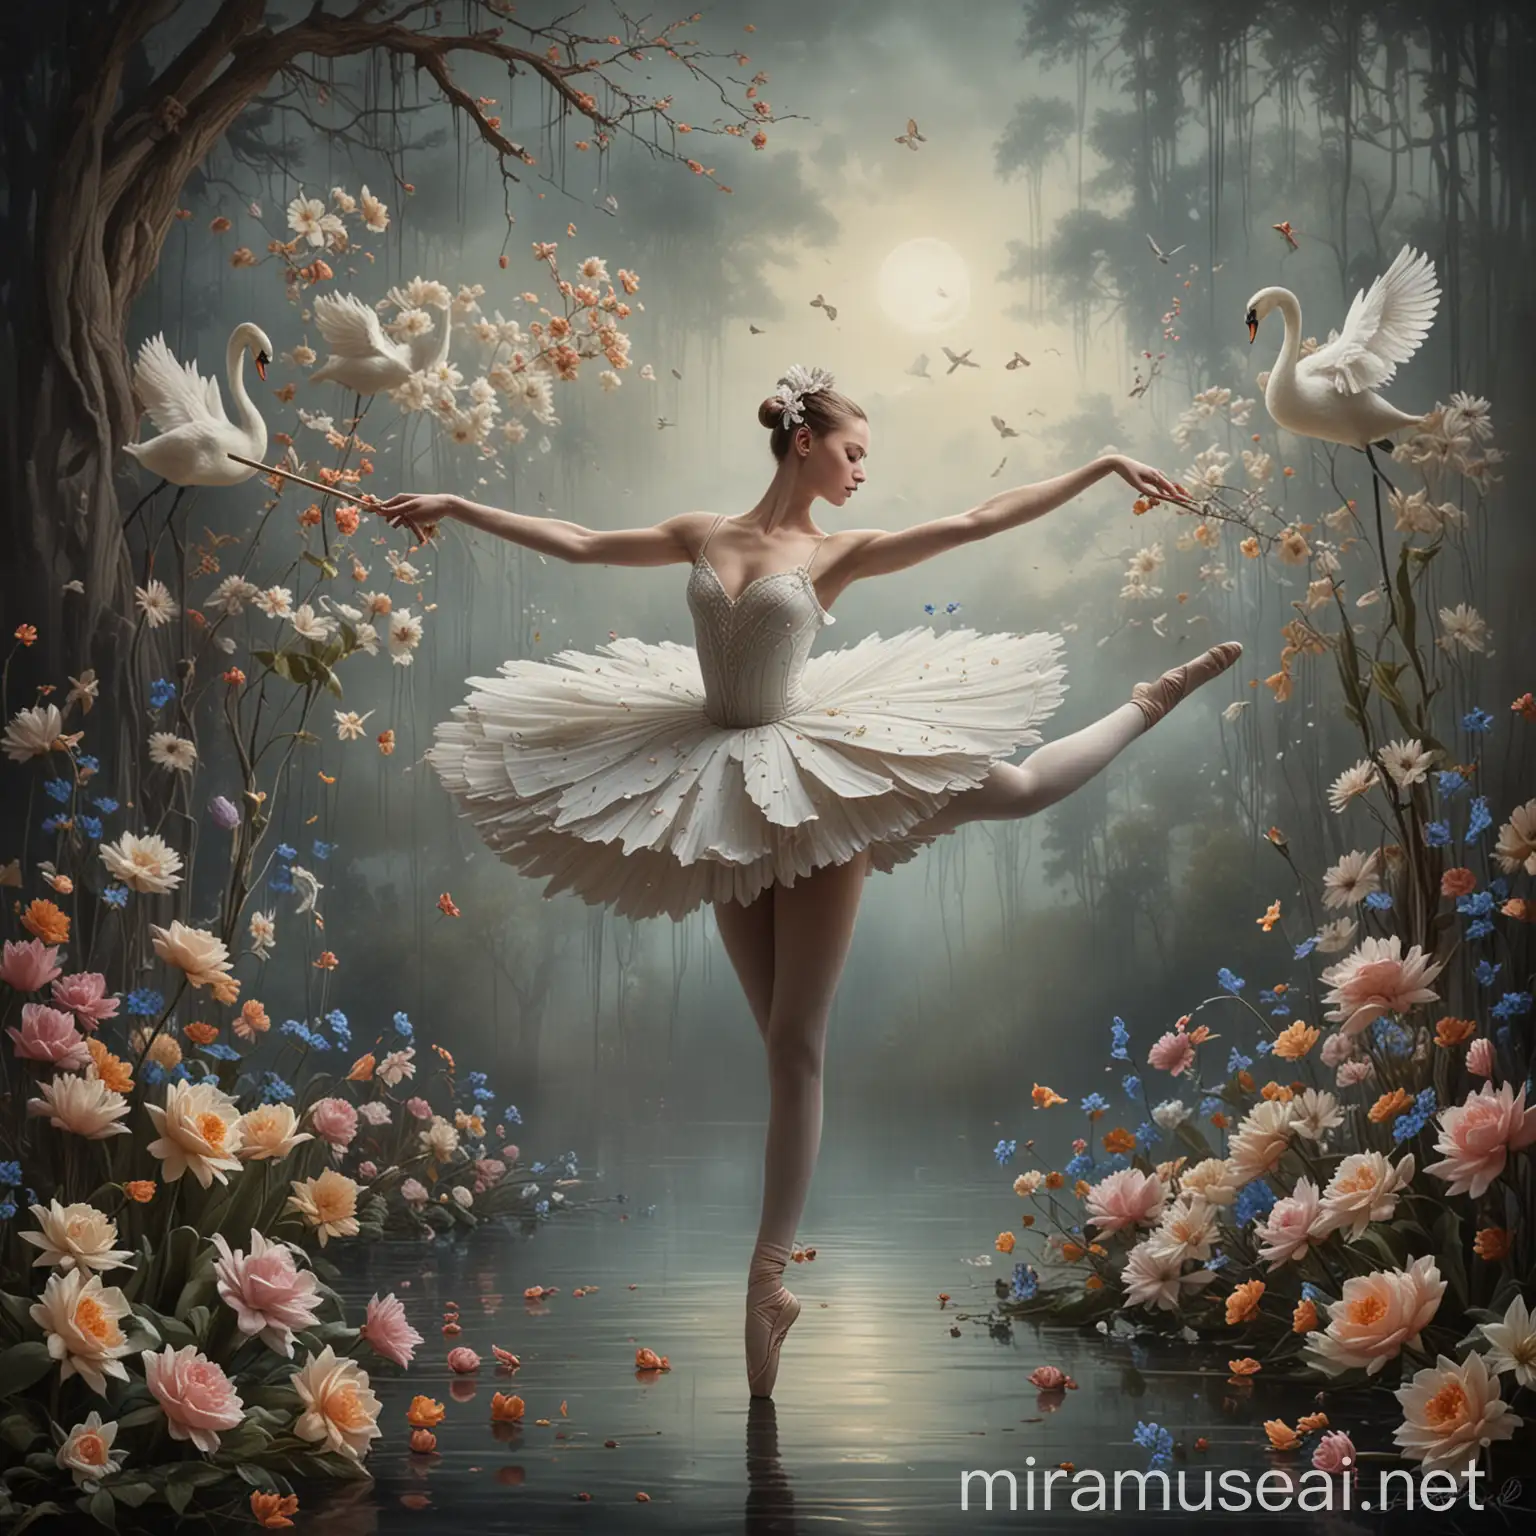 Surrealistic Ballet Performance with Music Notes and Swan Lake Theme